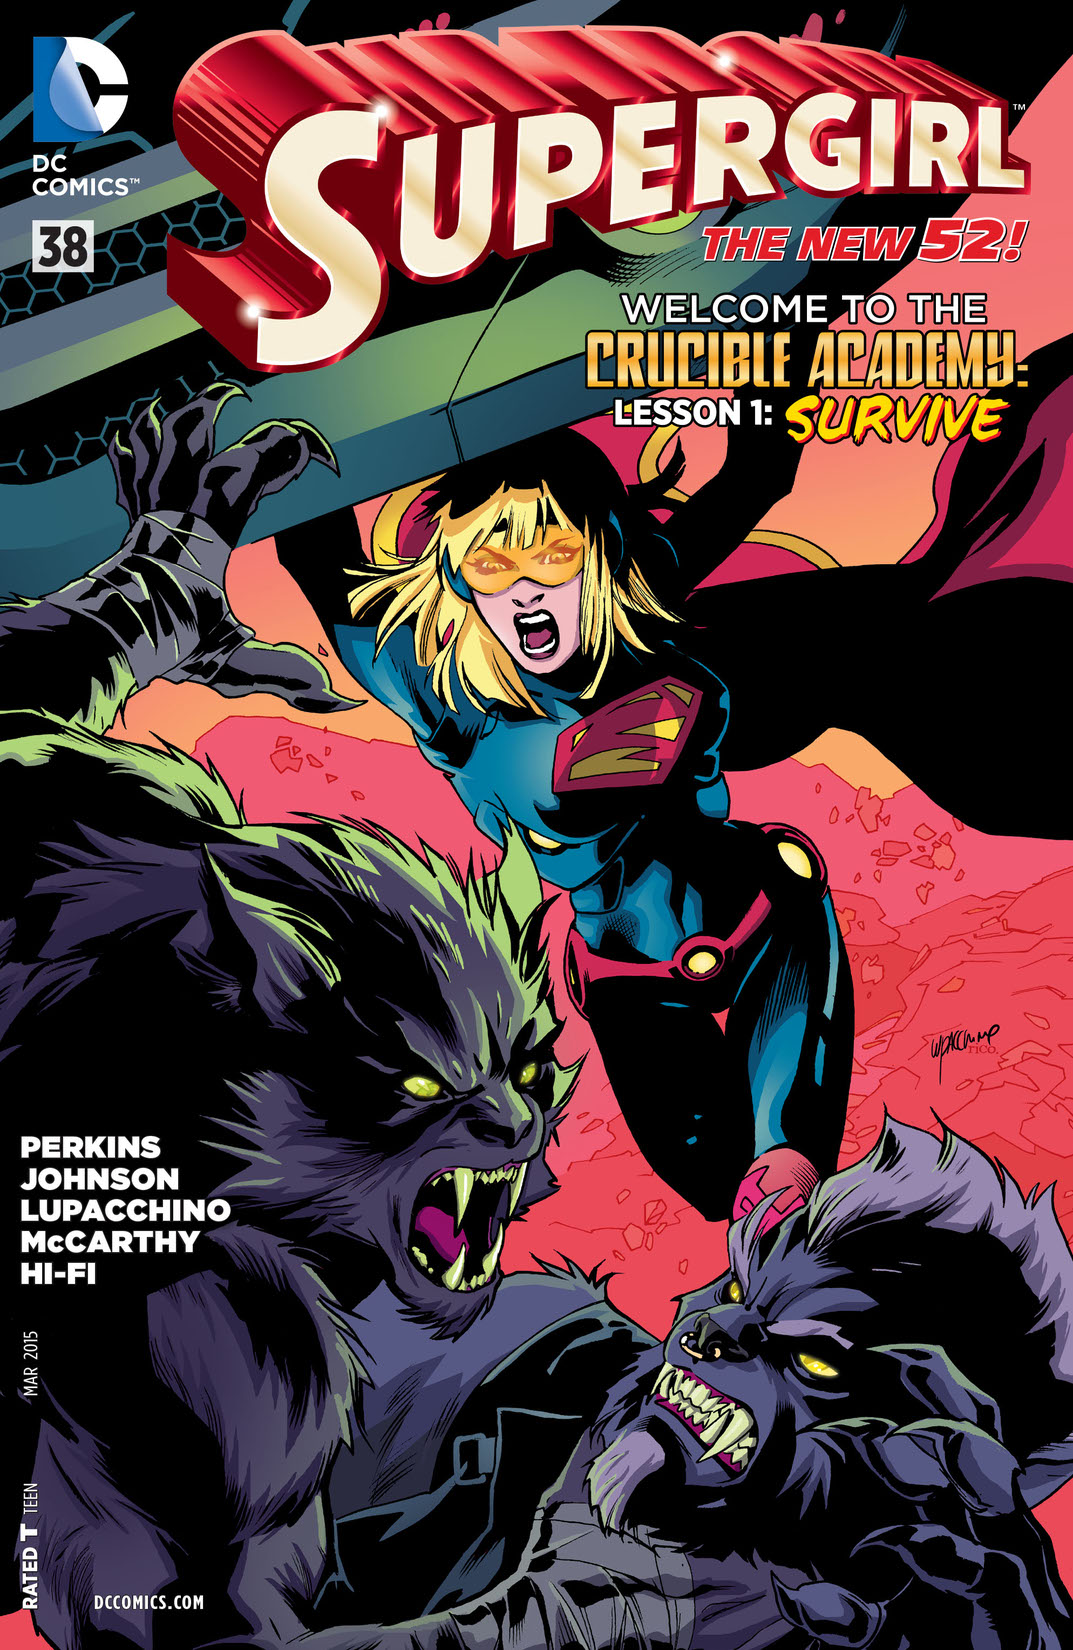 Supergirl (2011-) #38 preview images